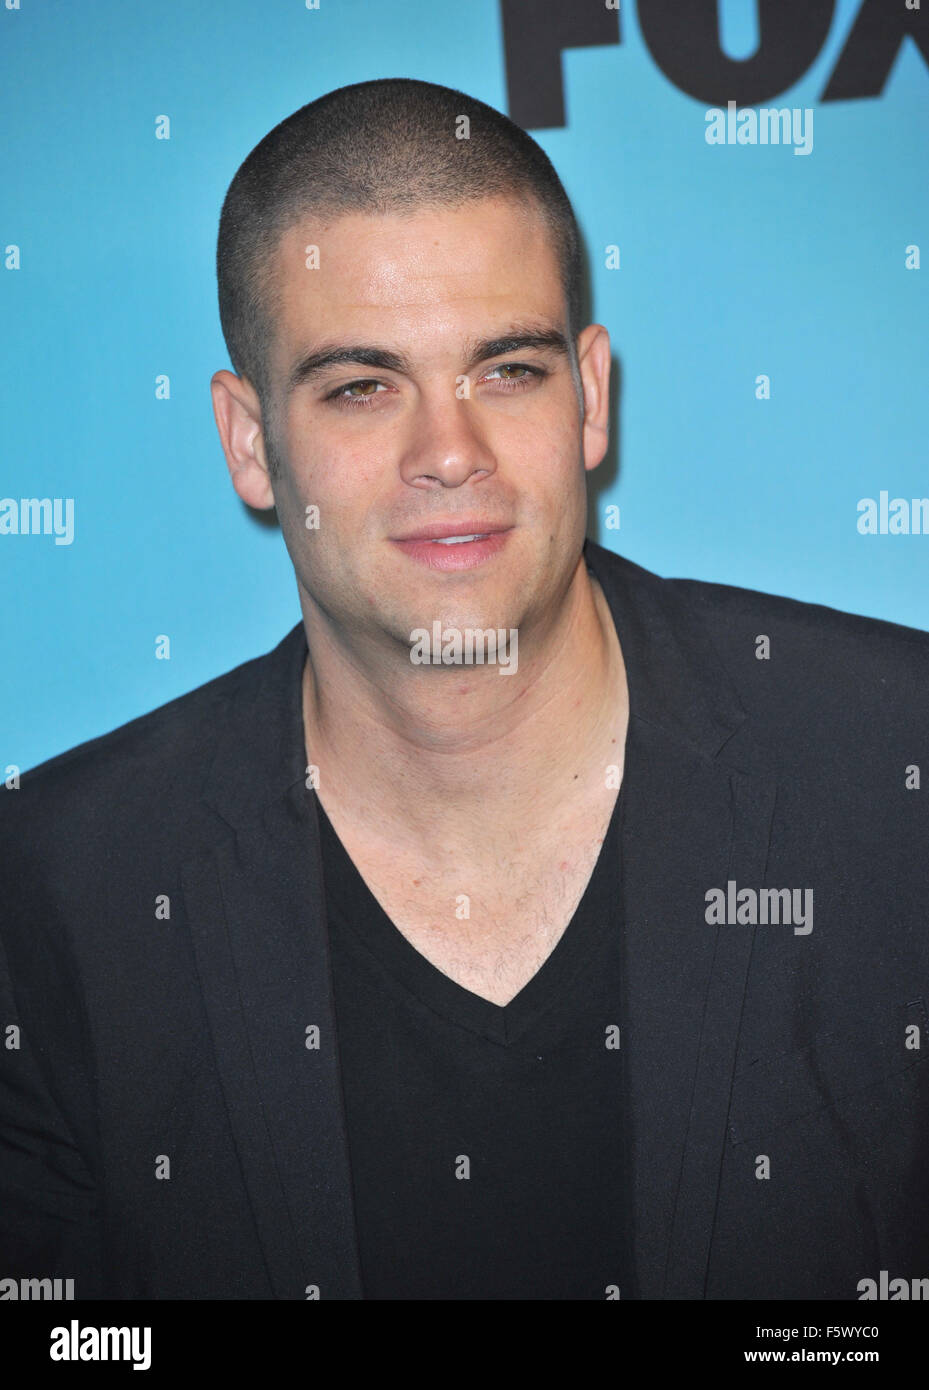 LOS ANGELES, CA - 12. April 2010: Mark jährlicher an der Spring-Serie "Glee" premiere Party im Chateau Marmont, West Hollywood. Stockfoto